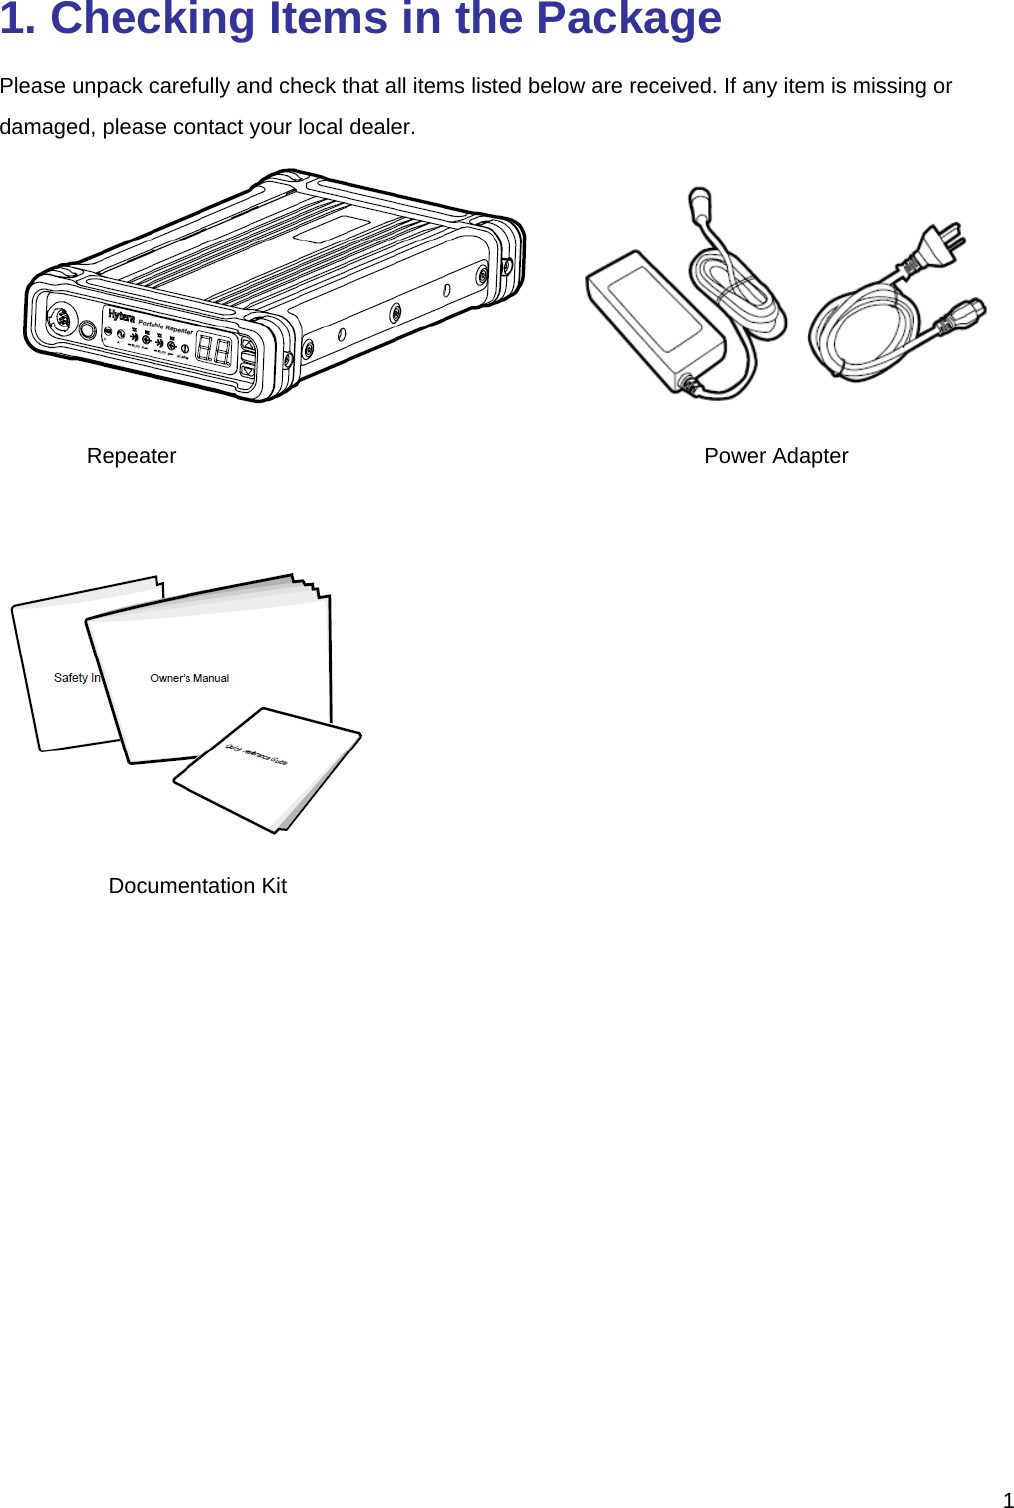  11. Checking Items in the Package Please unpack carefully and check that all items listed below are received. If any item is missing or damaged, please contact your local dealer.        Repeater           Power Adapter   Documentation Kit  